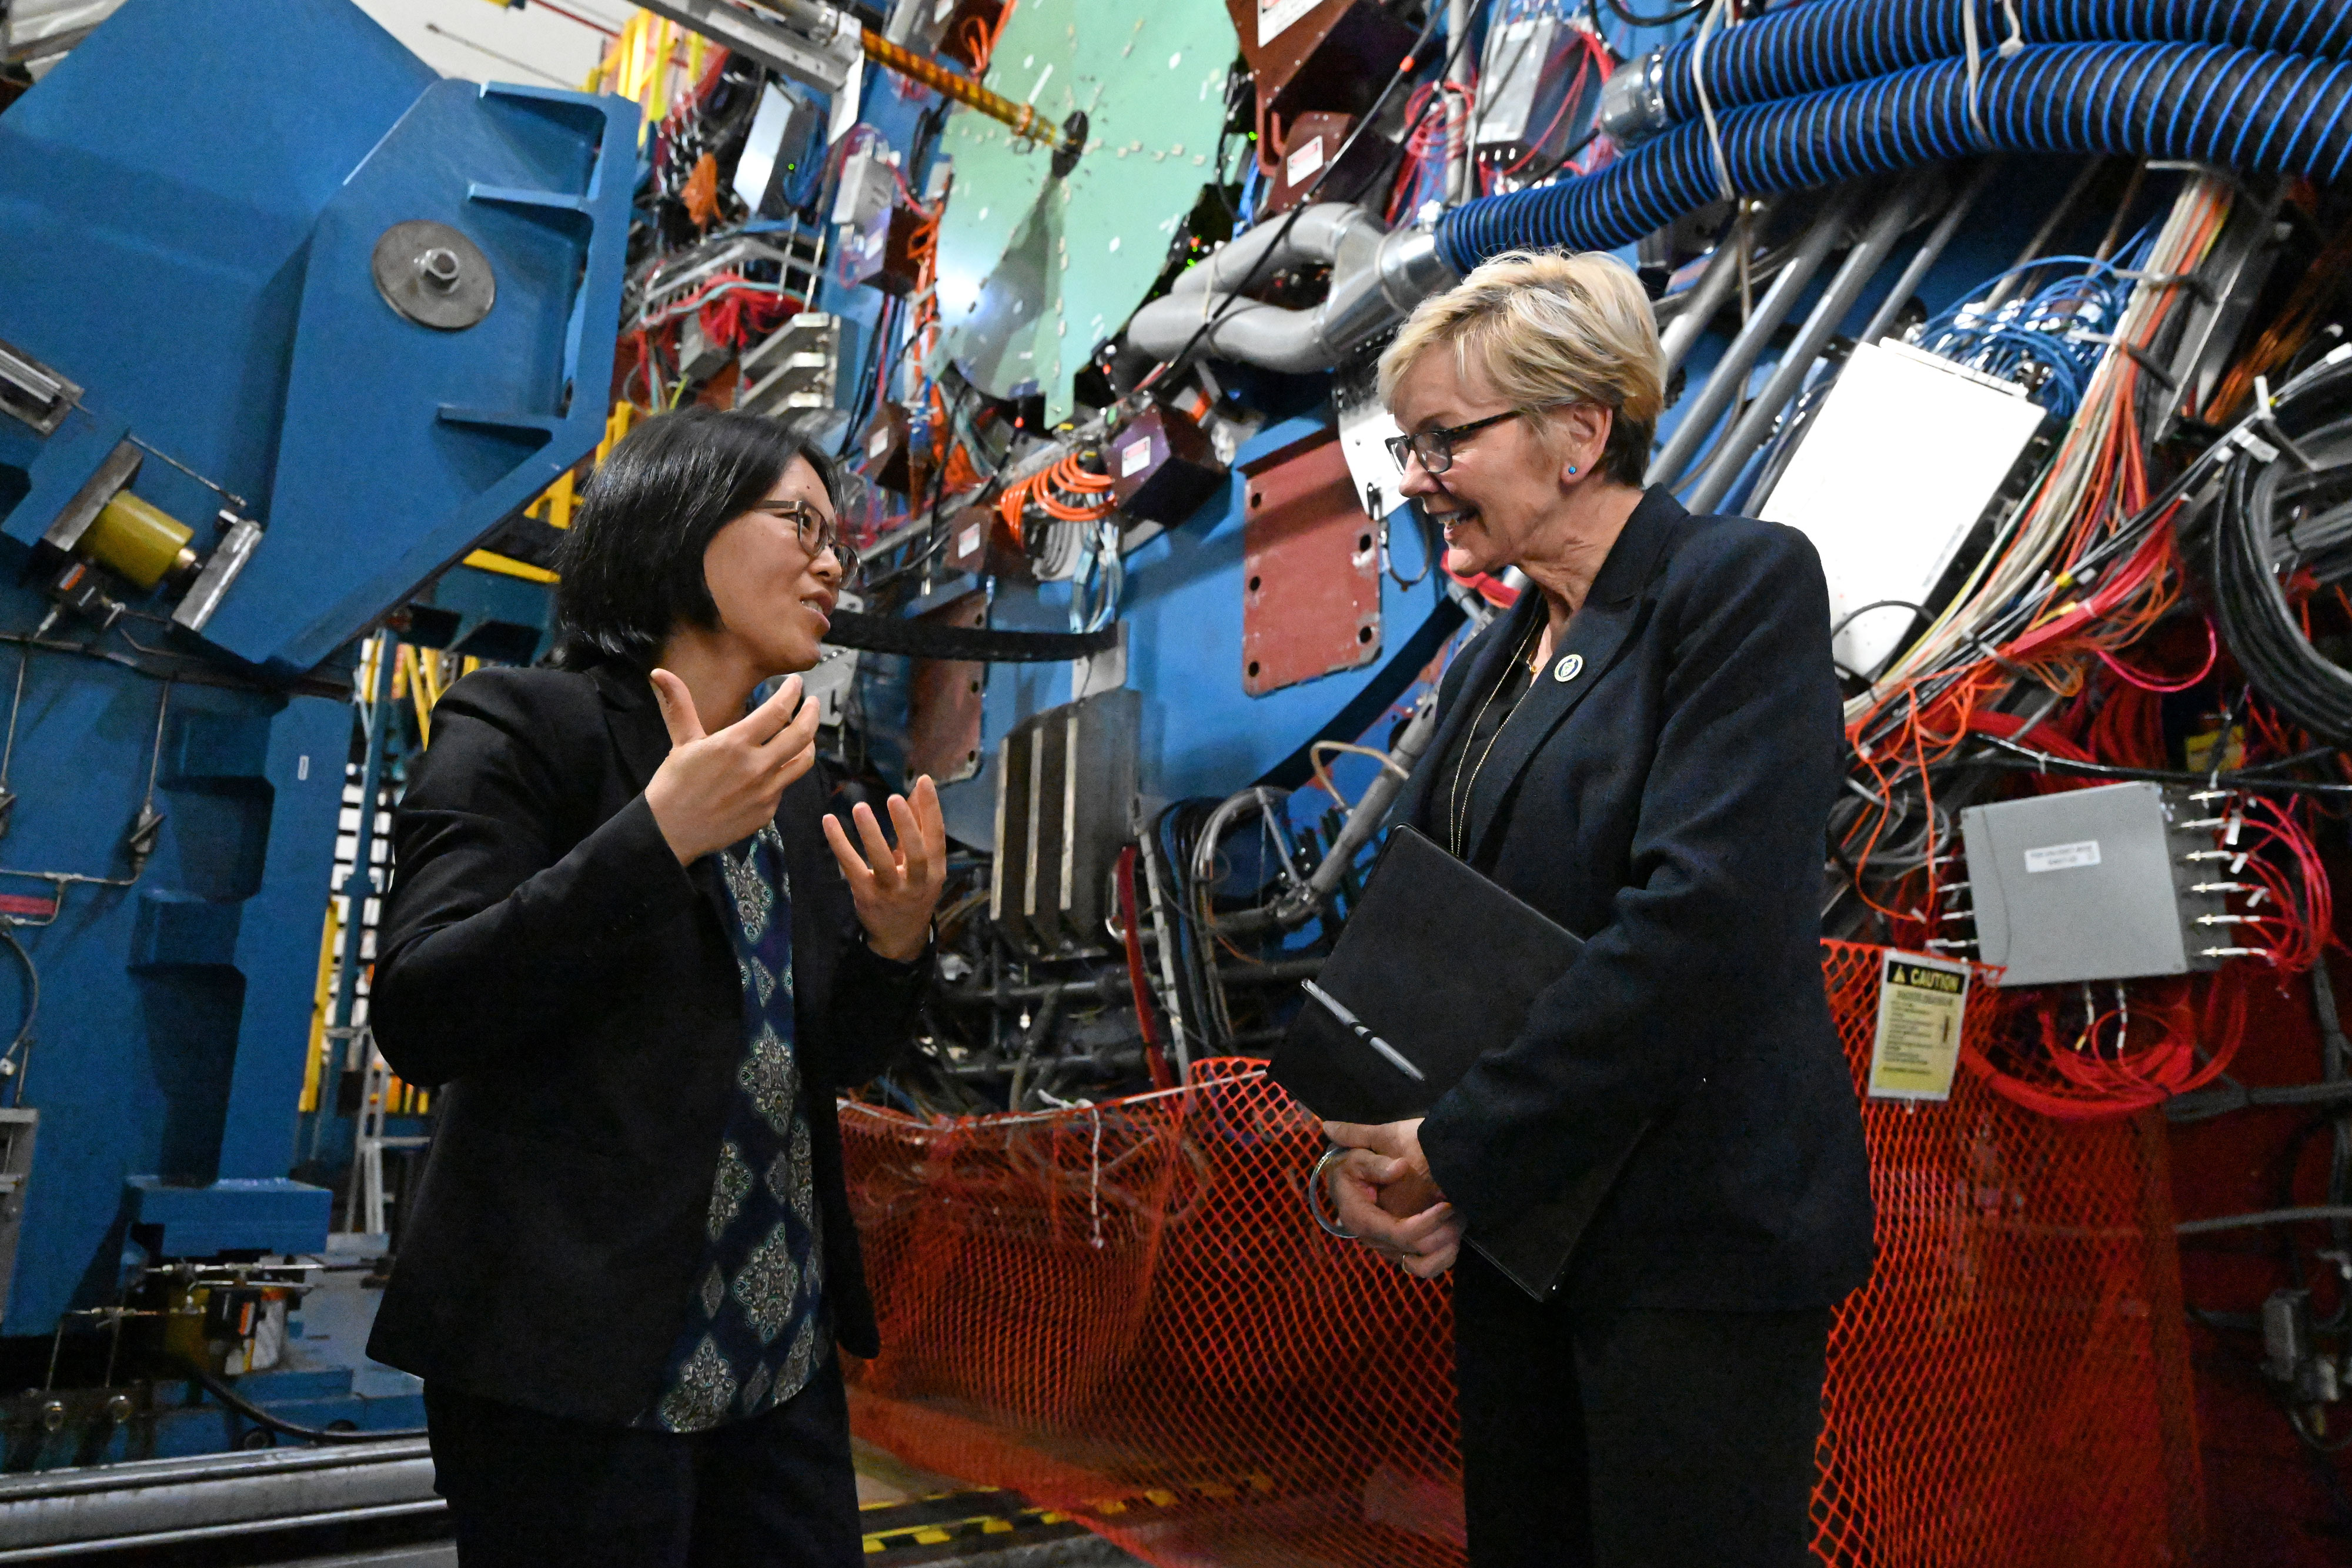 Lijuan Ruan, physicist and co-spokesperson for the STAR experiment collaboration at the Relativistic Heavy Ion Collider (RHIC), joined Secretary Granholm at the STAR detector, which tracks thousands of particles streaming out of collisions at RHIC. 